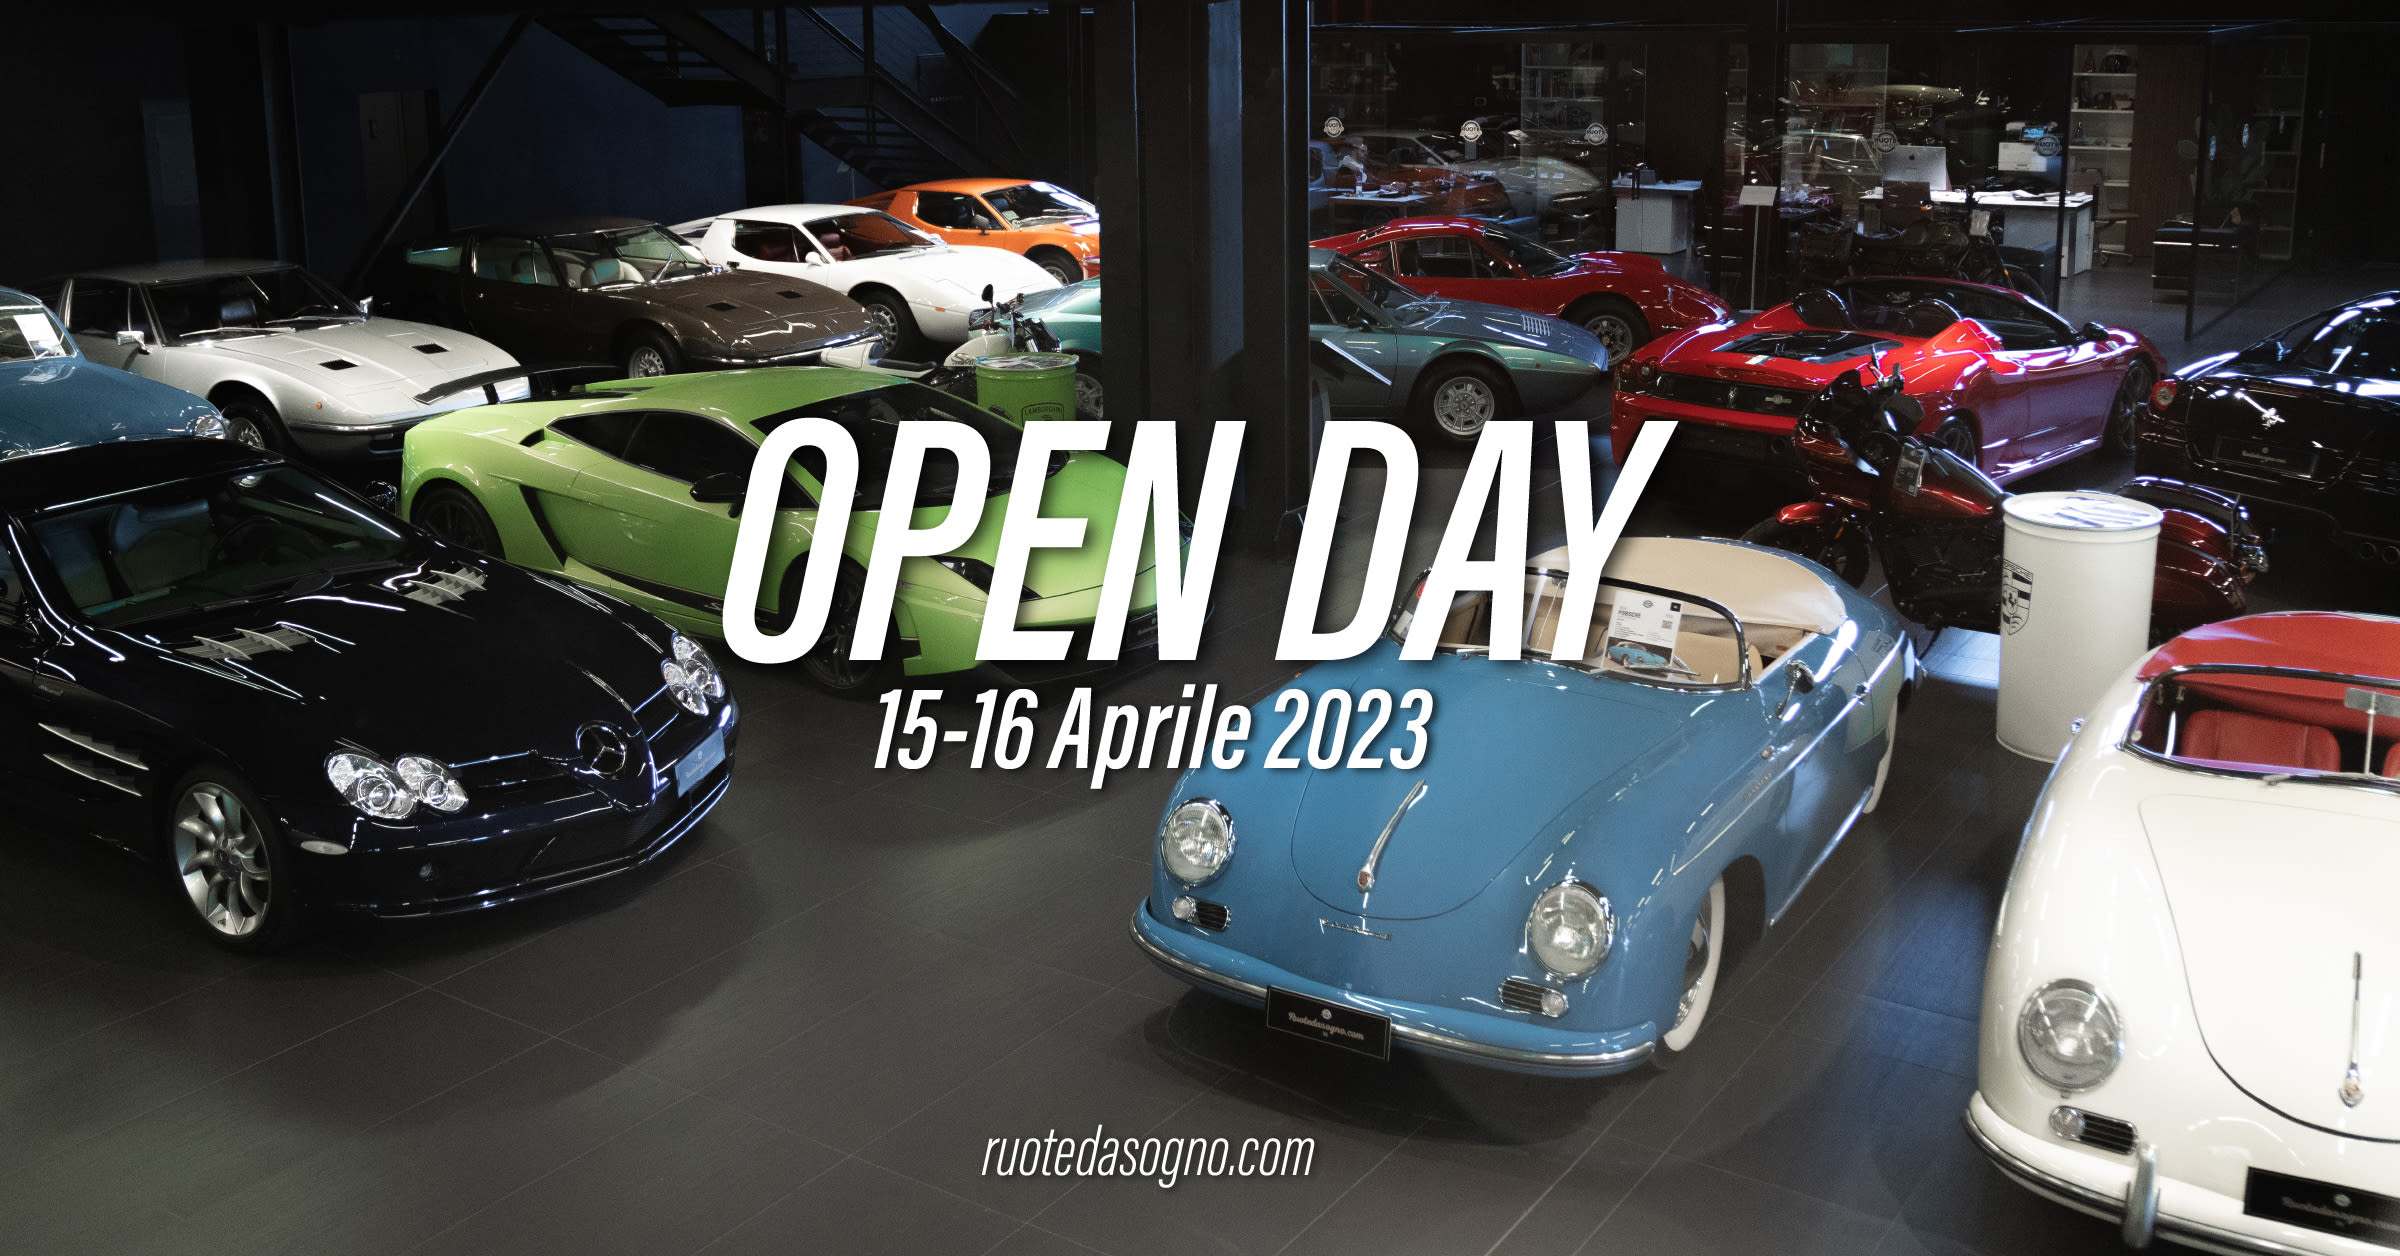 OpenDay - 15/16 Aprile 2023